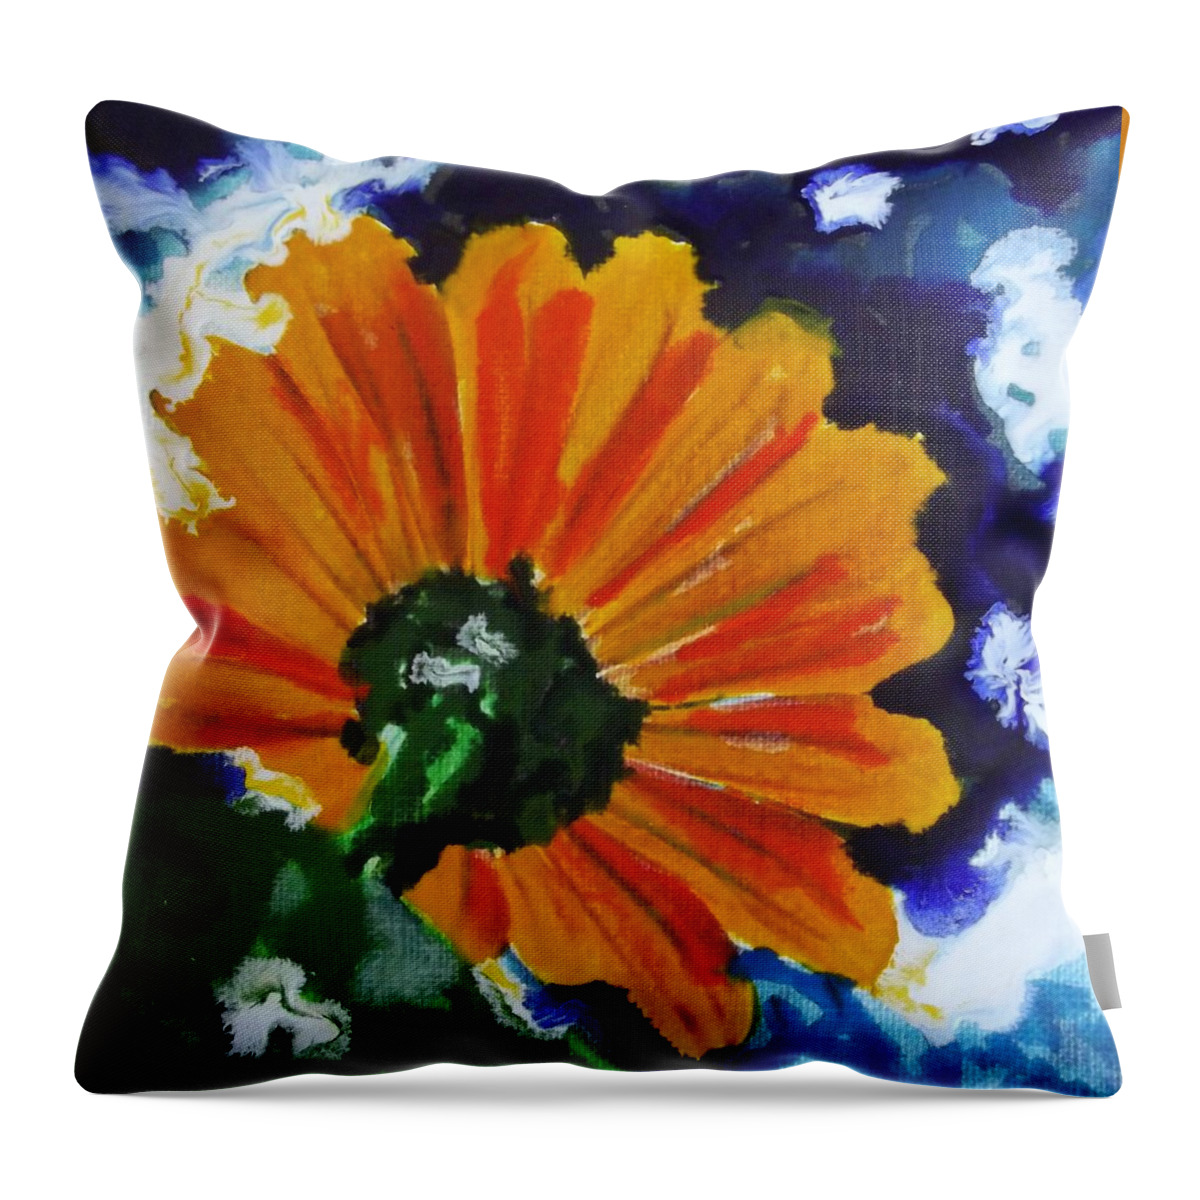 Floral Throw Pillow featuring the painting Liquid Sky by Cara Frafjord